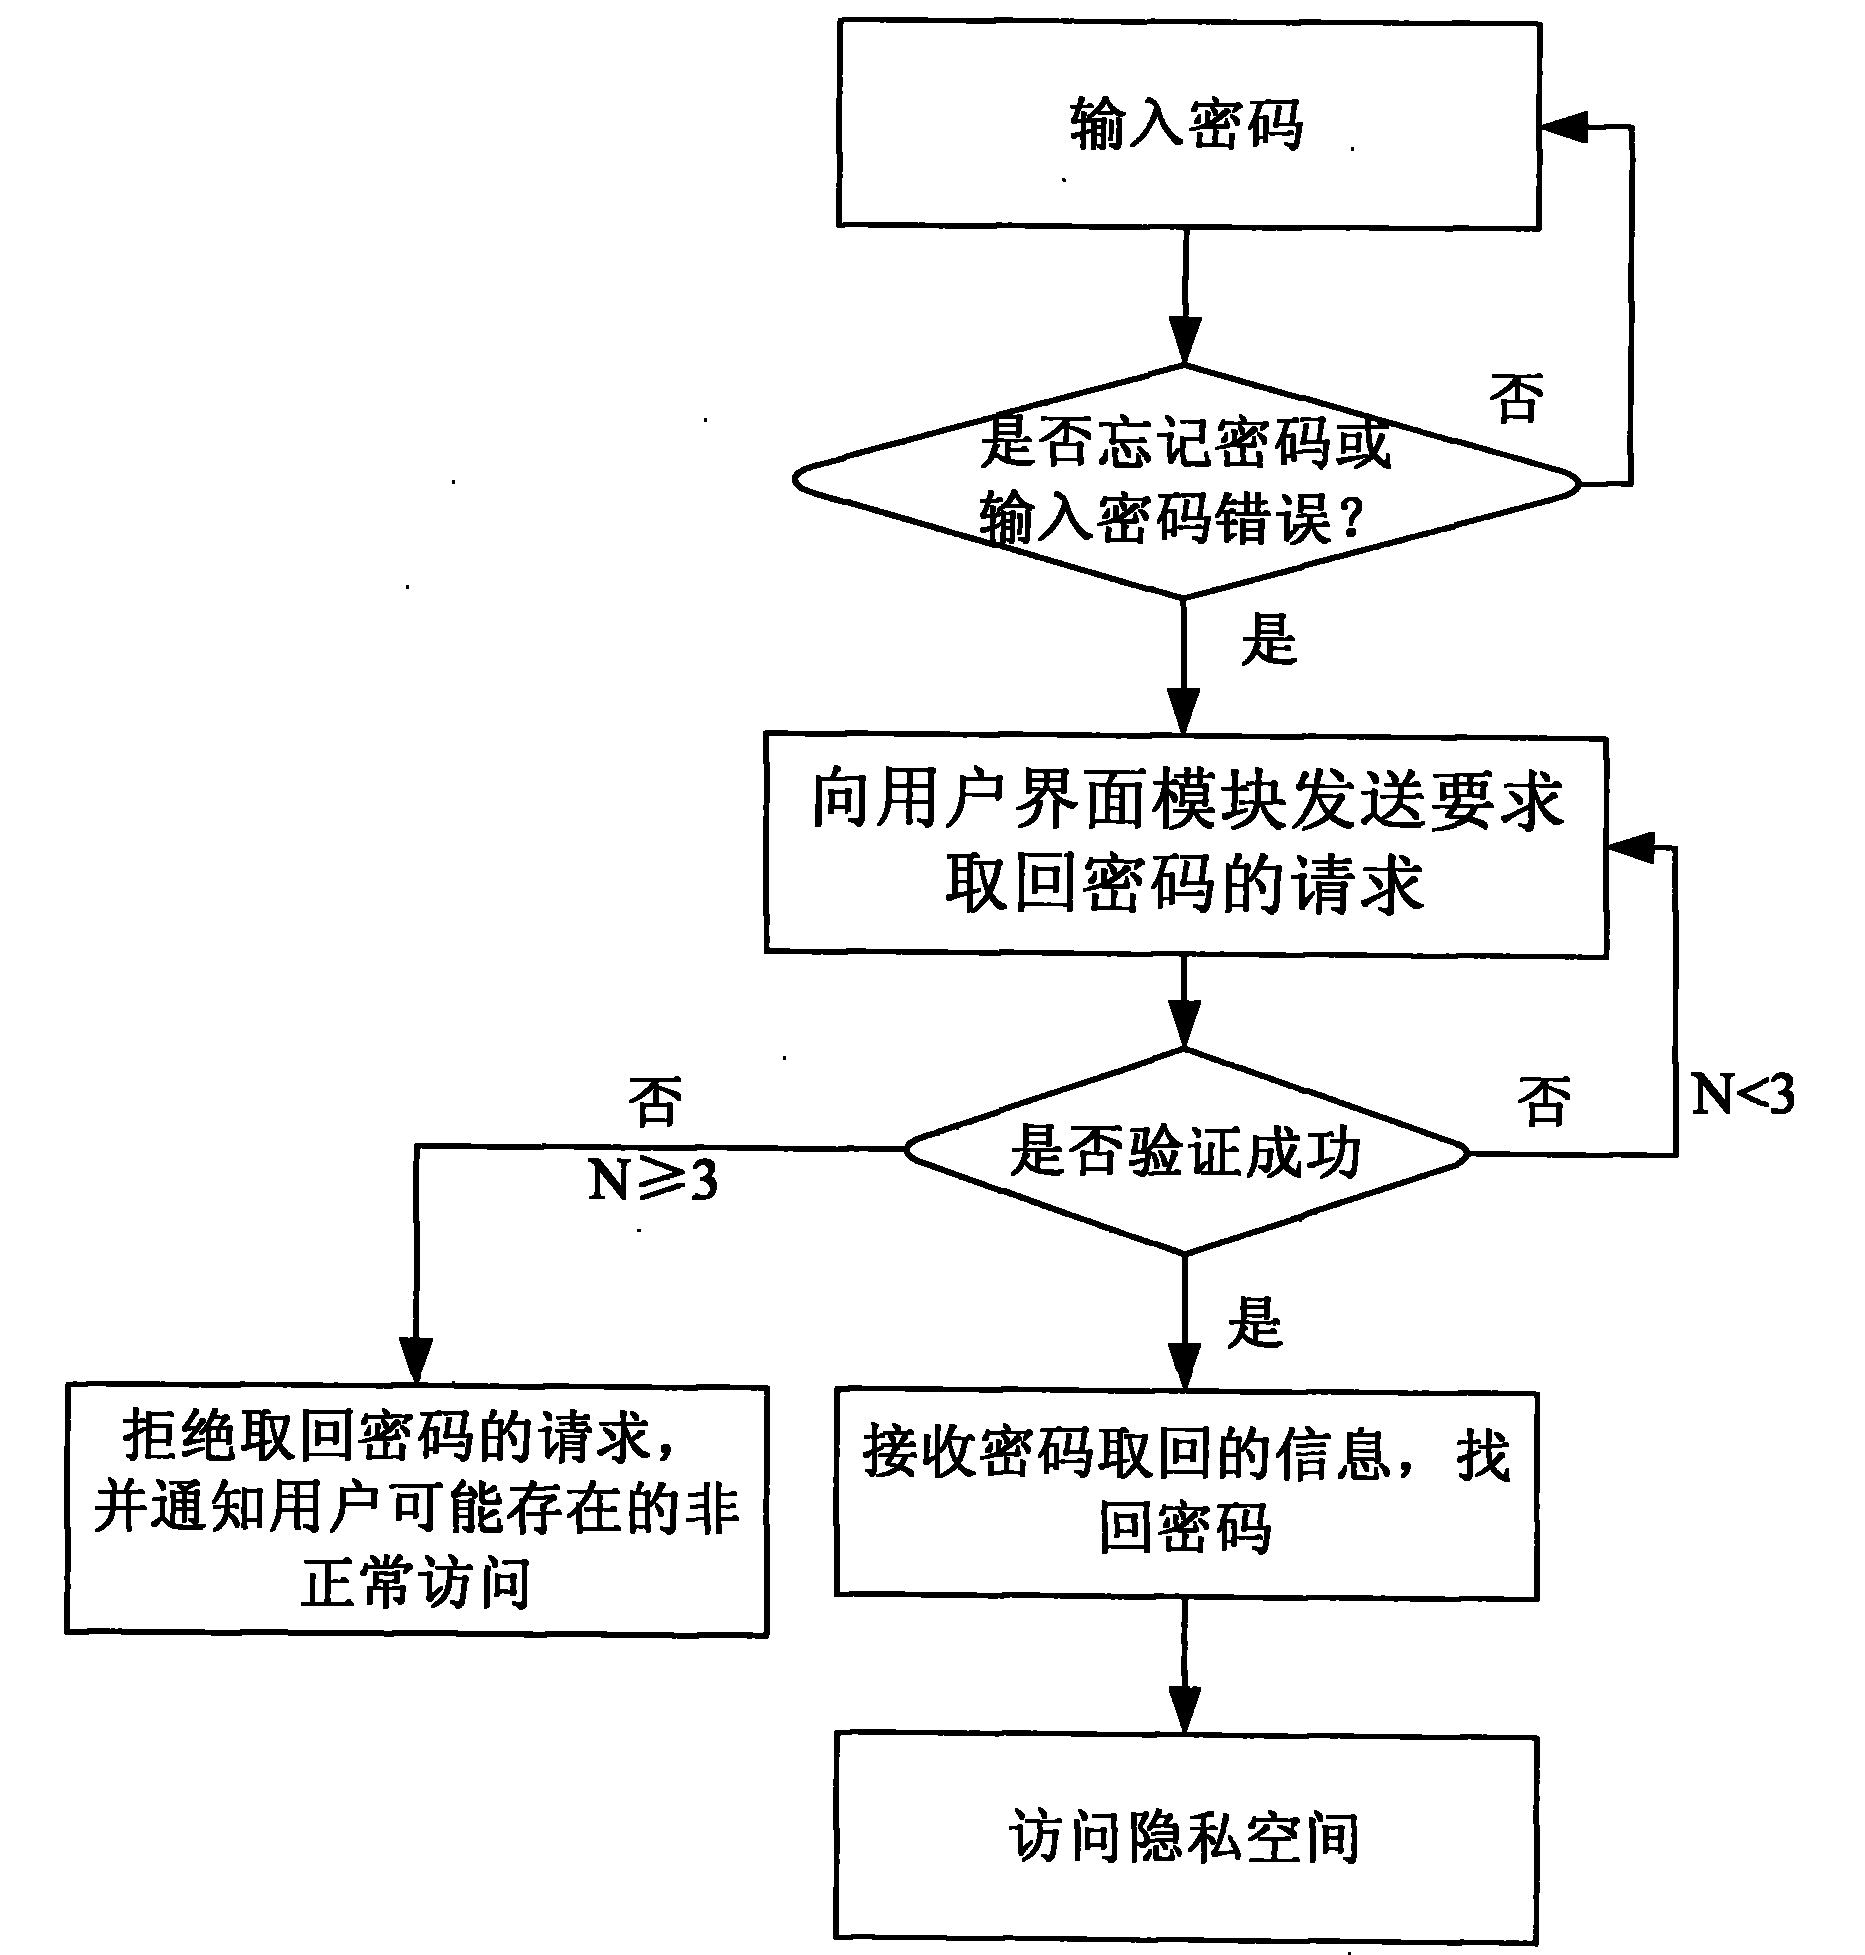 Method for retrieving password of mobile phone private space